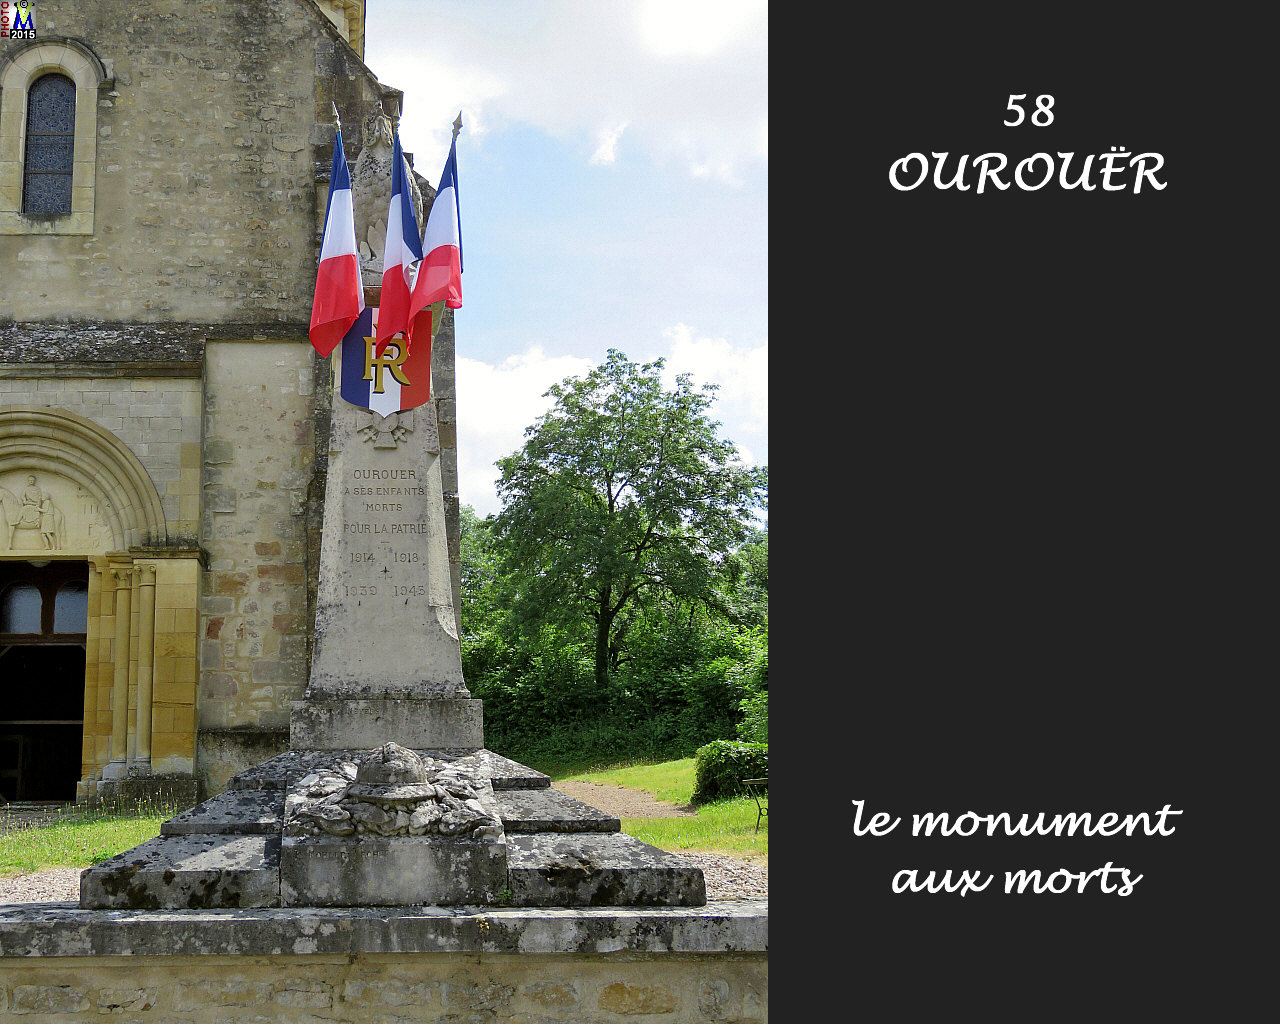 58OUROUER_morts_100.jpg